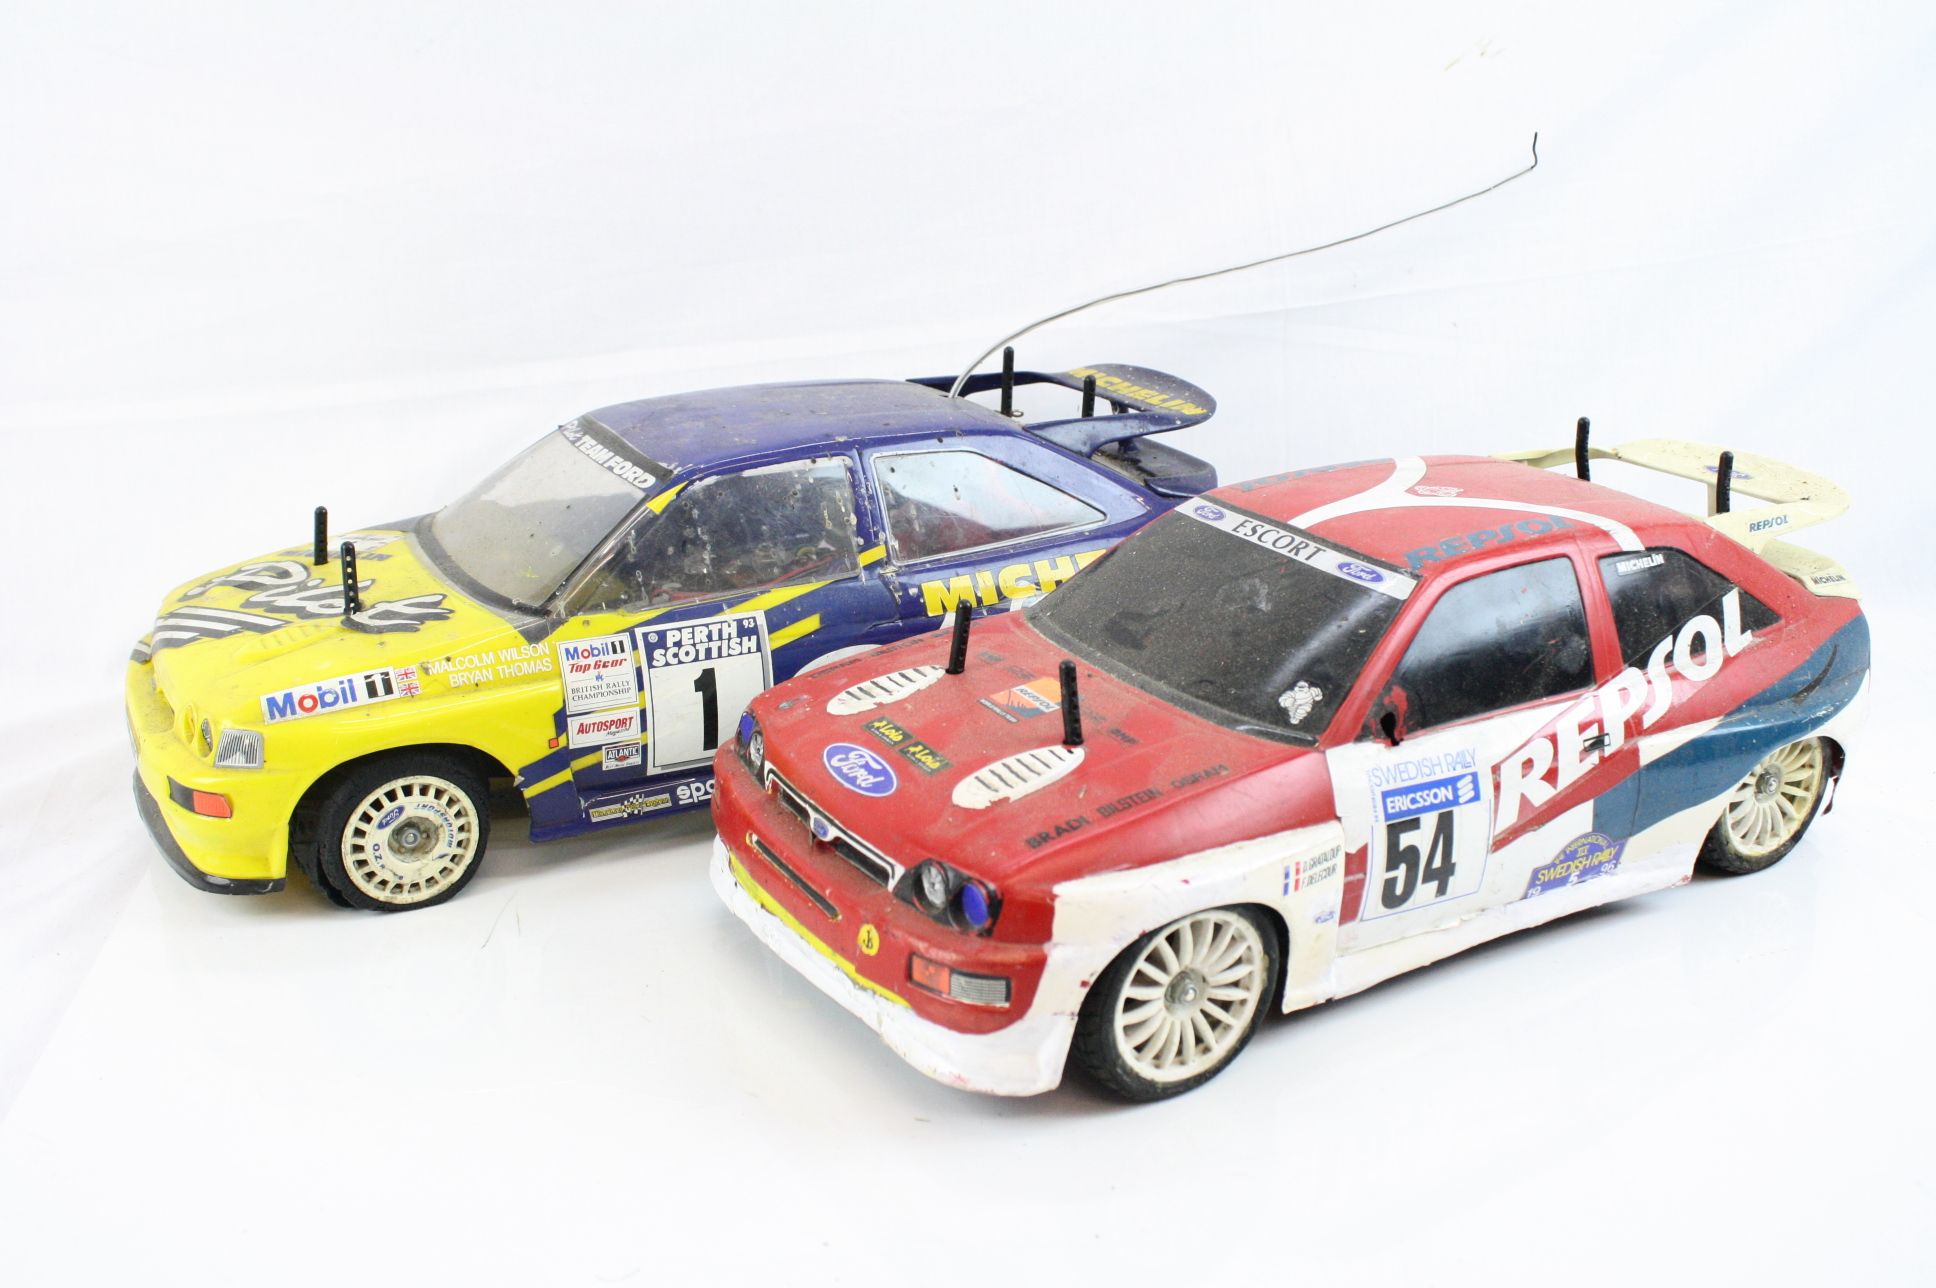 A Tamiya 58125 Ford Escort RS Michelin Pilot with TA01 chassis together with a Tamiya Ford Escort RS - Image 4 of 5